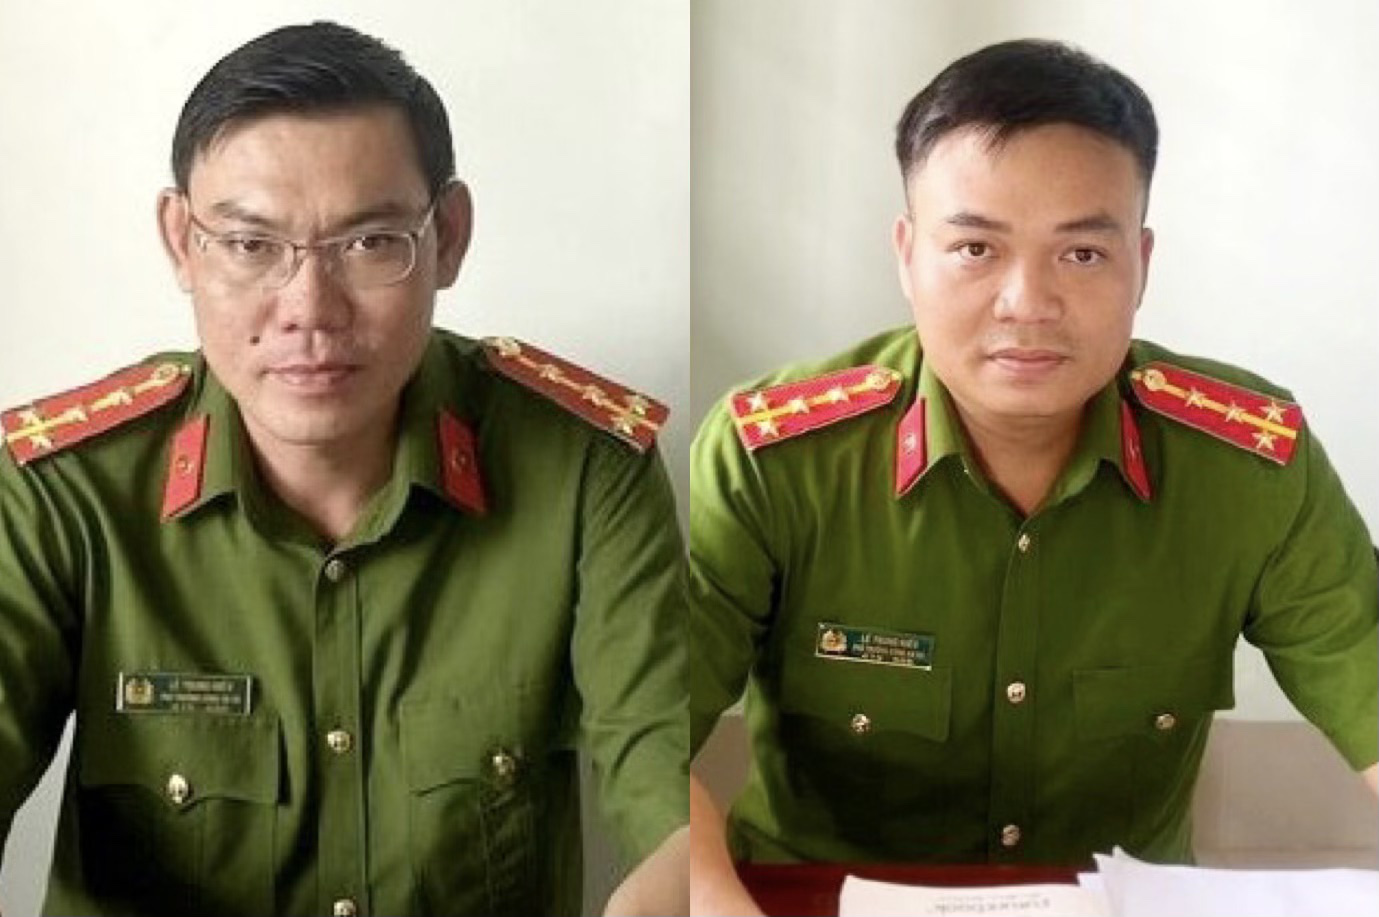 Vietnamese police officers lauded for saving Chinese child from drowning